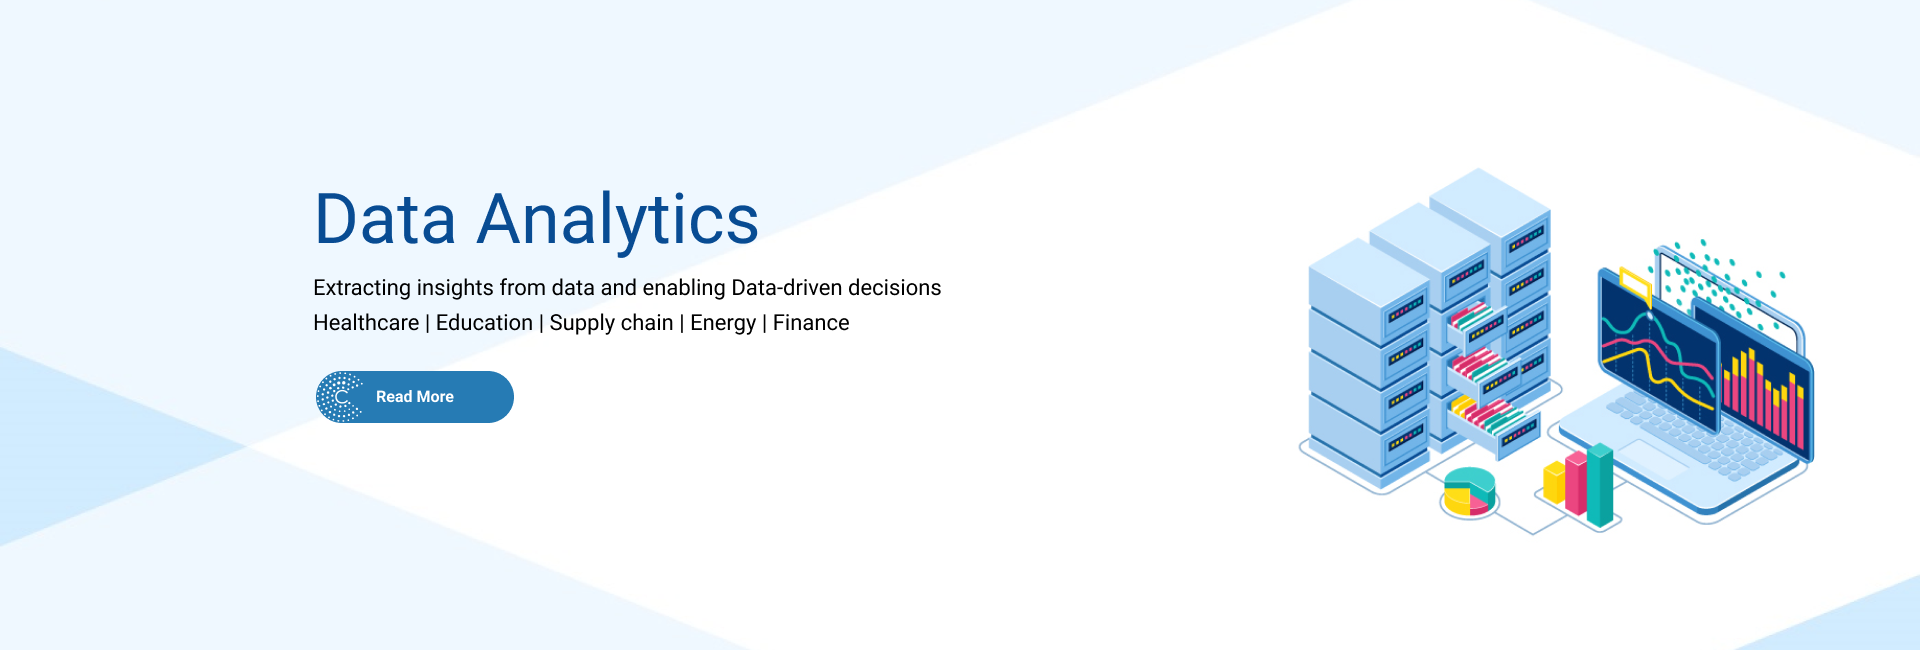 Data Analytics - Extracting insights from data and enabling Data-driven Decisions - Healthcare, Energy, Education, Transportation